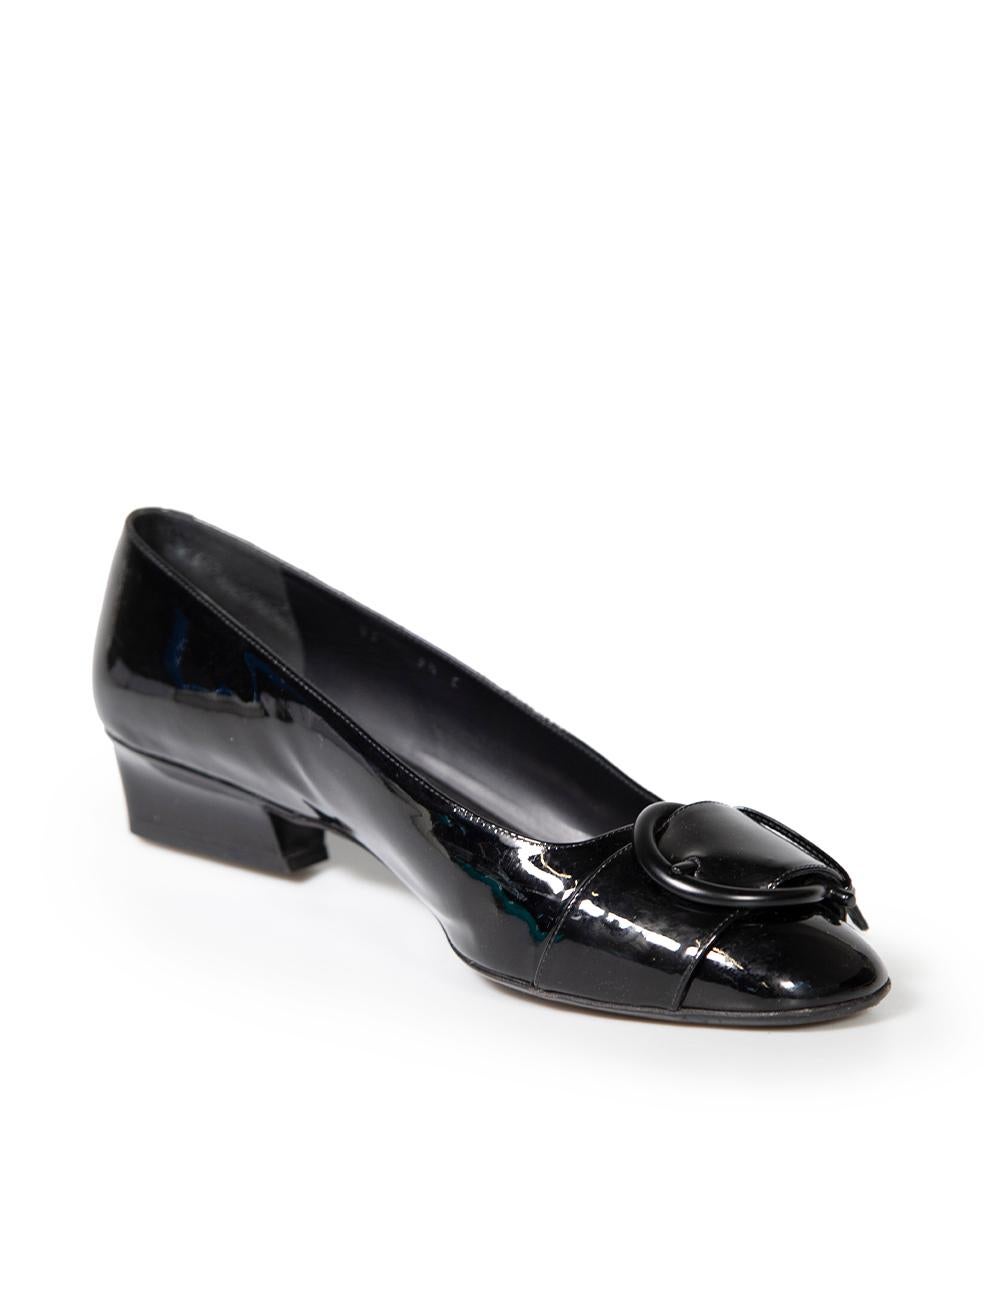 CONDITION is Very good. Minimal wear to shoes is evident. Minimal wear to the left-side of left shoe with small mark to the patent leather on this used Salvatore Ferragamo designer resale item.
 
 
 
 Details
 
 
 Gancini
 
 Black
 
 Patent leather
